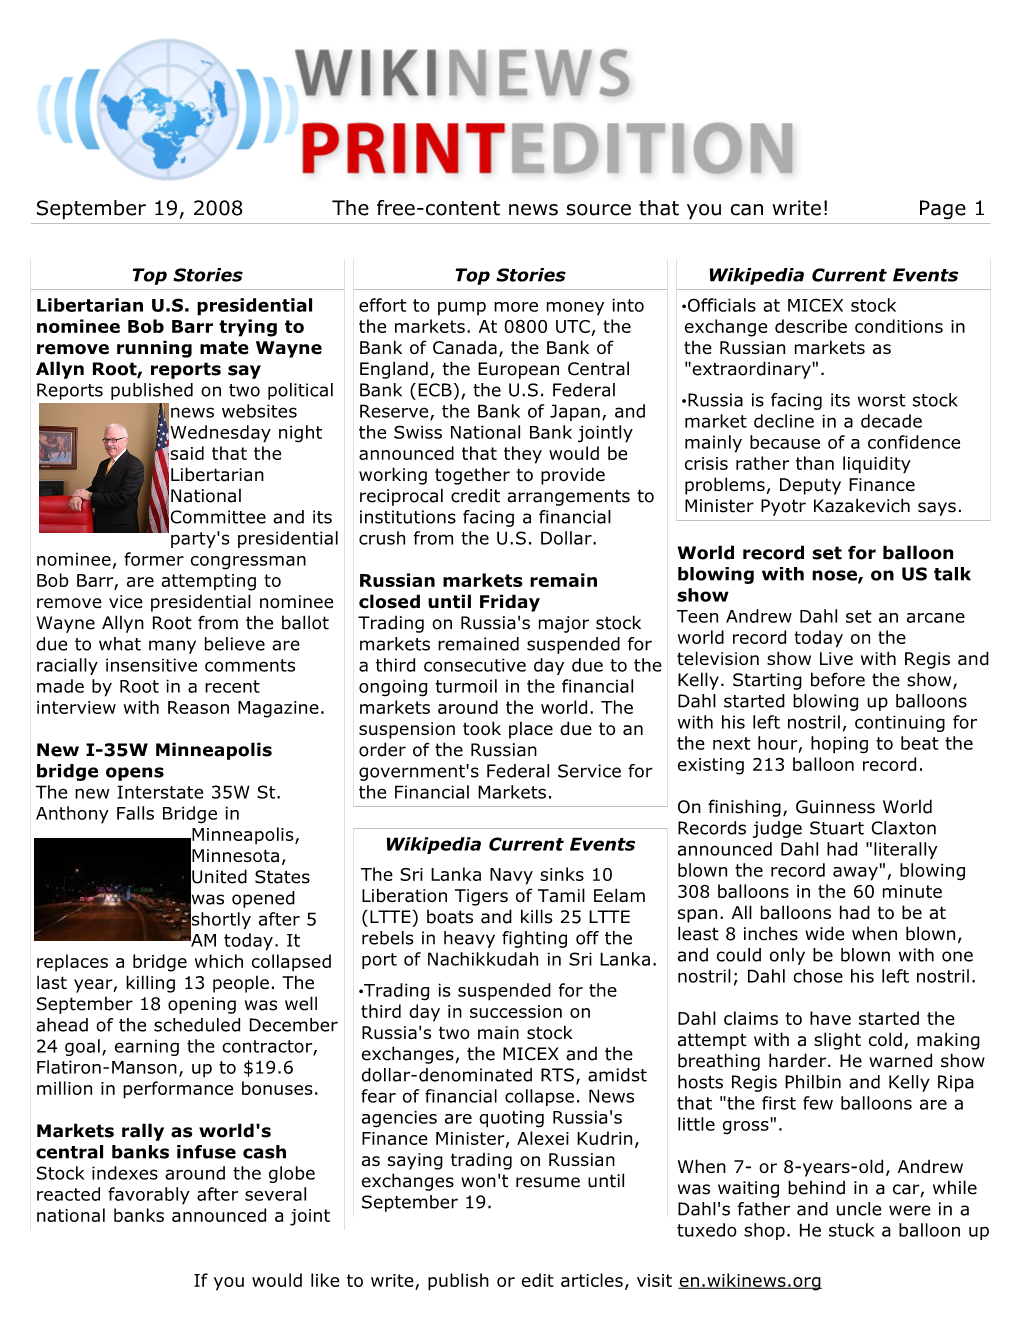 September 19, 2008 the Free-Content News Source That You Can Write! Page 1